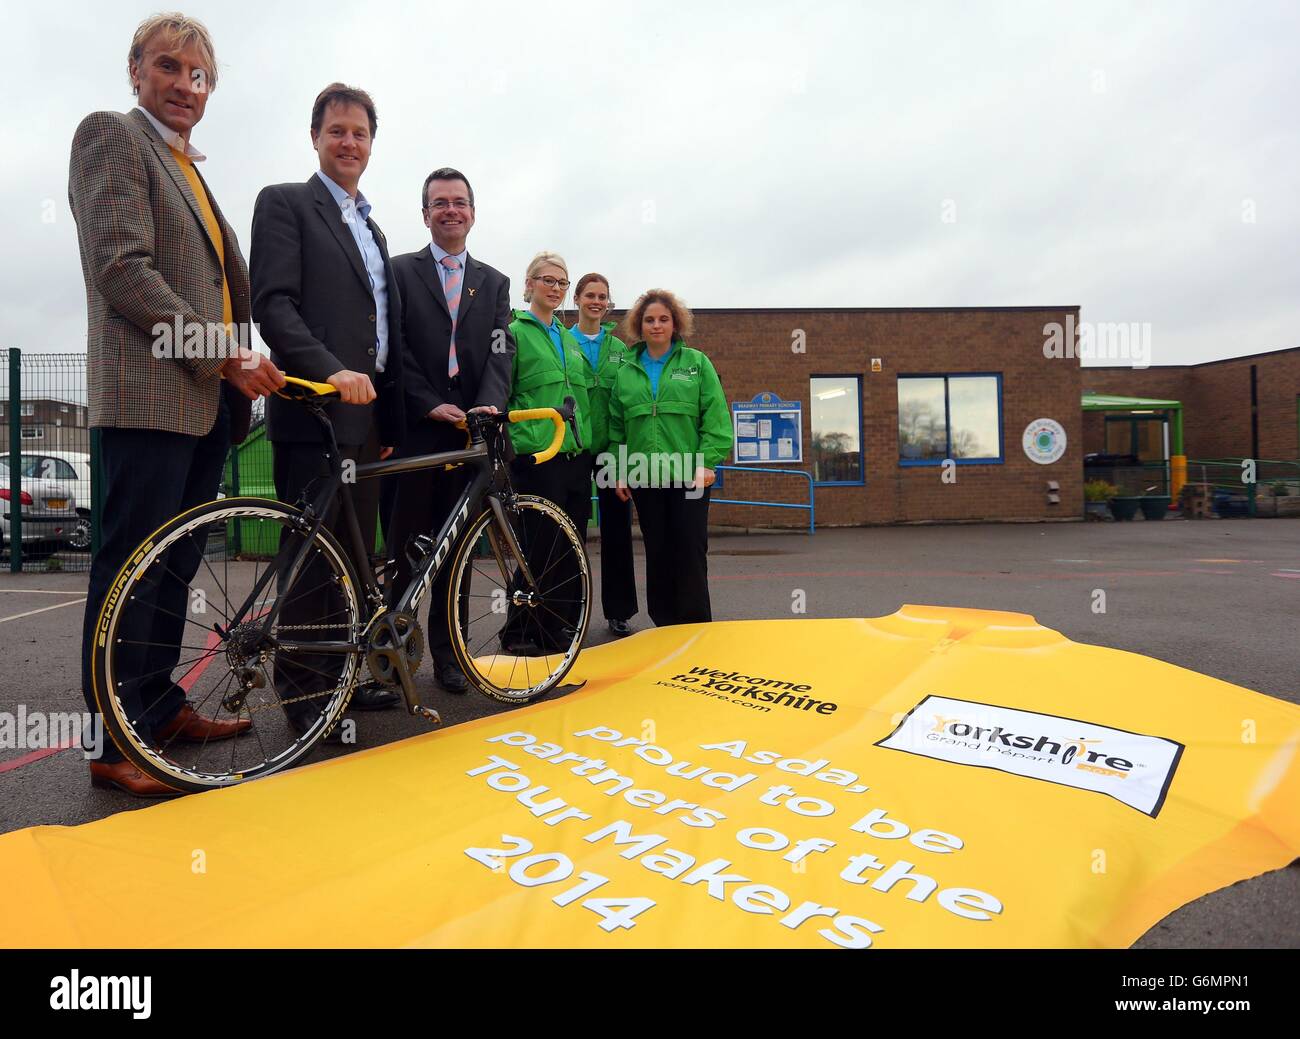 (left to right) Commonwealth bronze medal cyclist Malcolm Elliott , Deputy Prime Minister Nick Clegg and ASDA External Affairs Director Paul Kelly are joined back Tour Makers Katie Denton, Nicola Holloway and Carla Gillott, during the Grand Depart Tour Maker launch at Bradway Primary School, Sheffield. Stock Photo